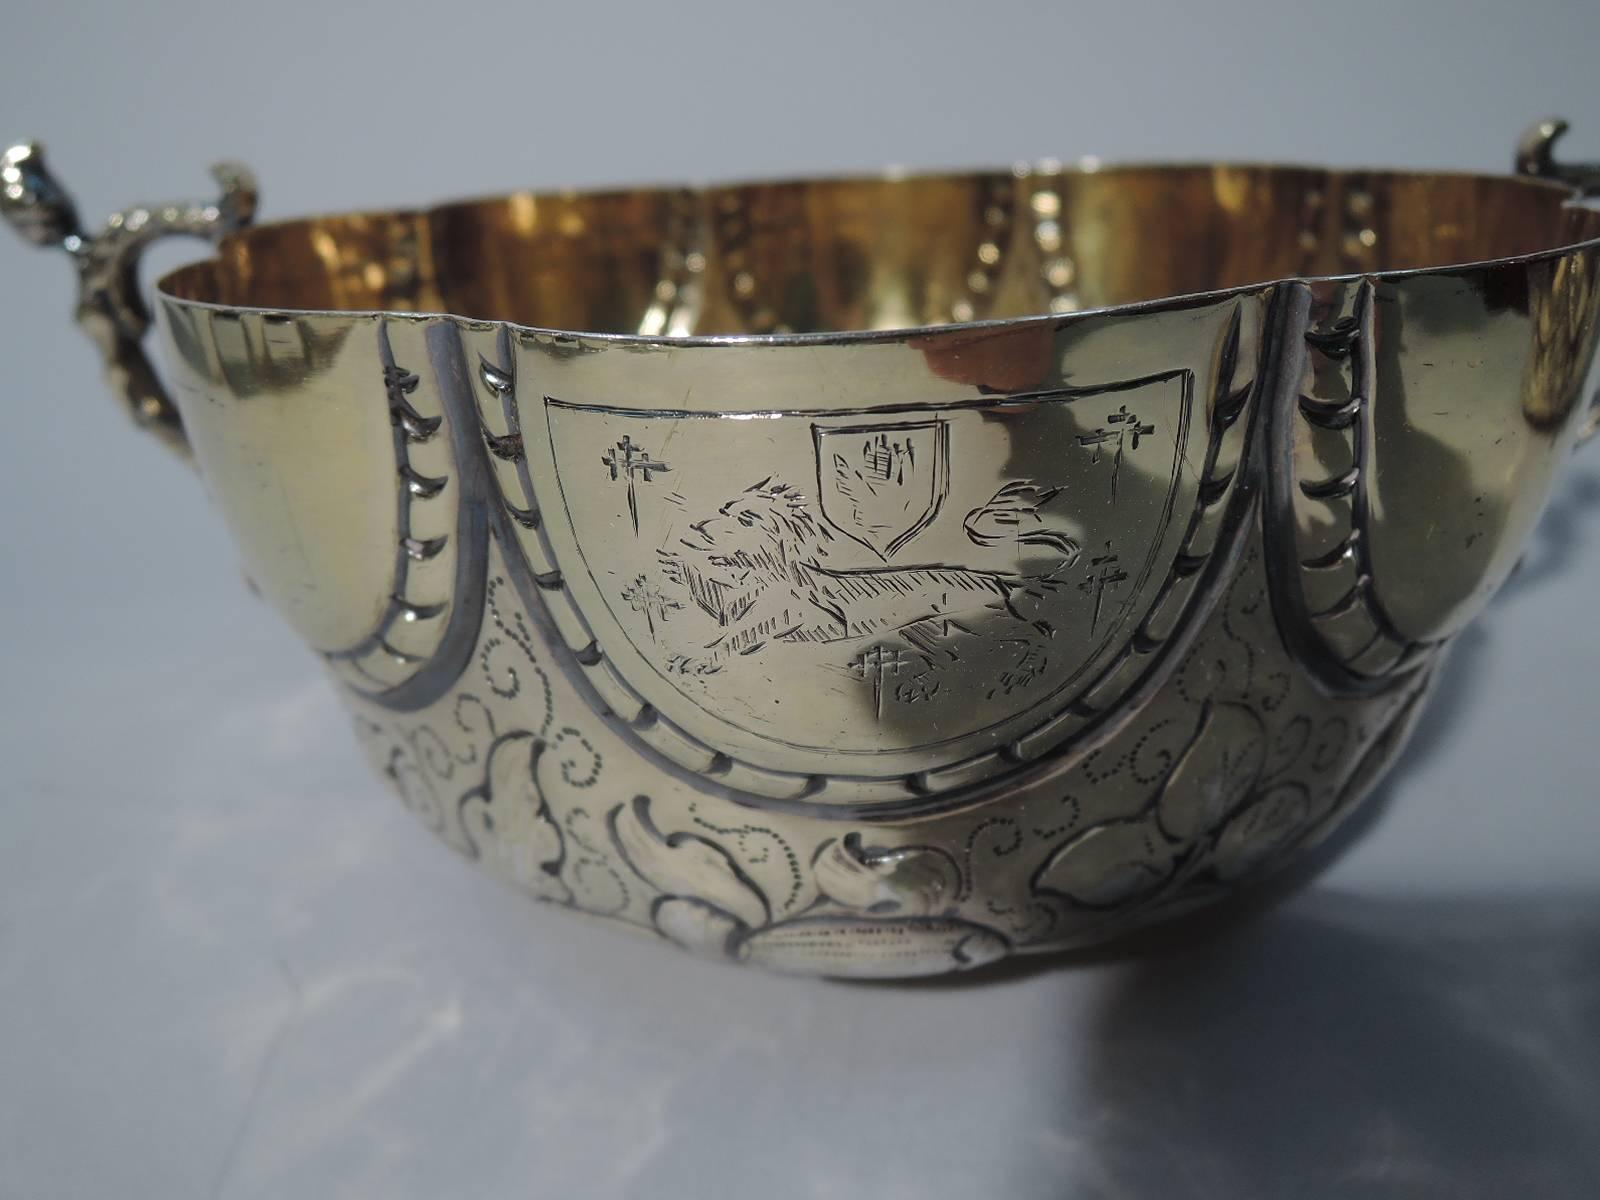 Charles II Pair of Antique Silver Gilt Bowls in Late 17th-Century English Stuart Style